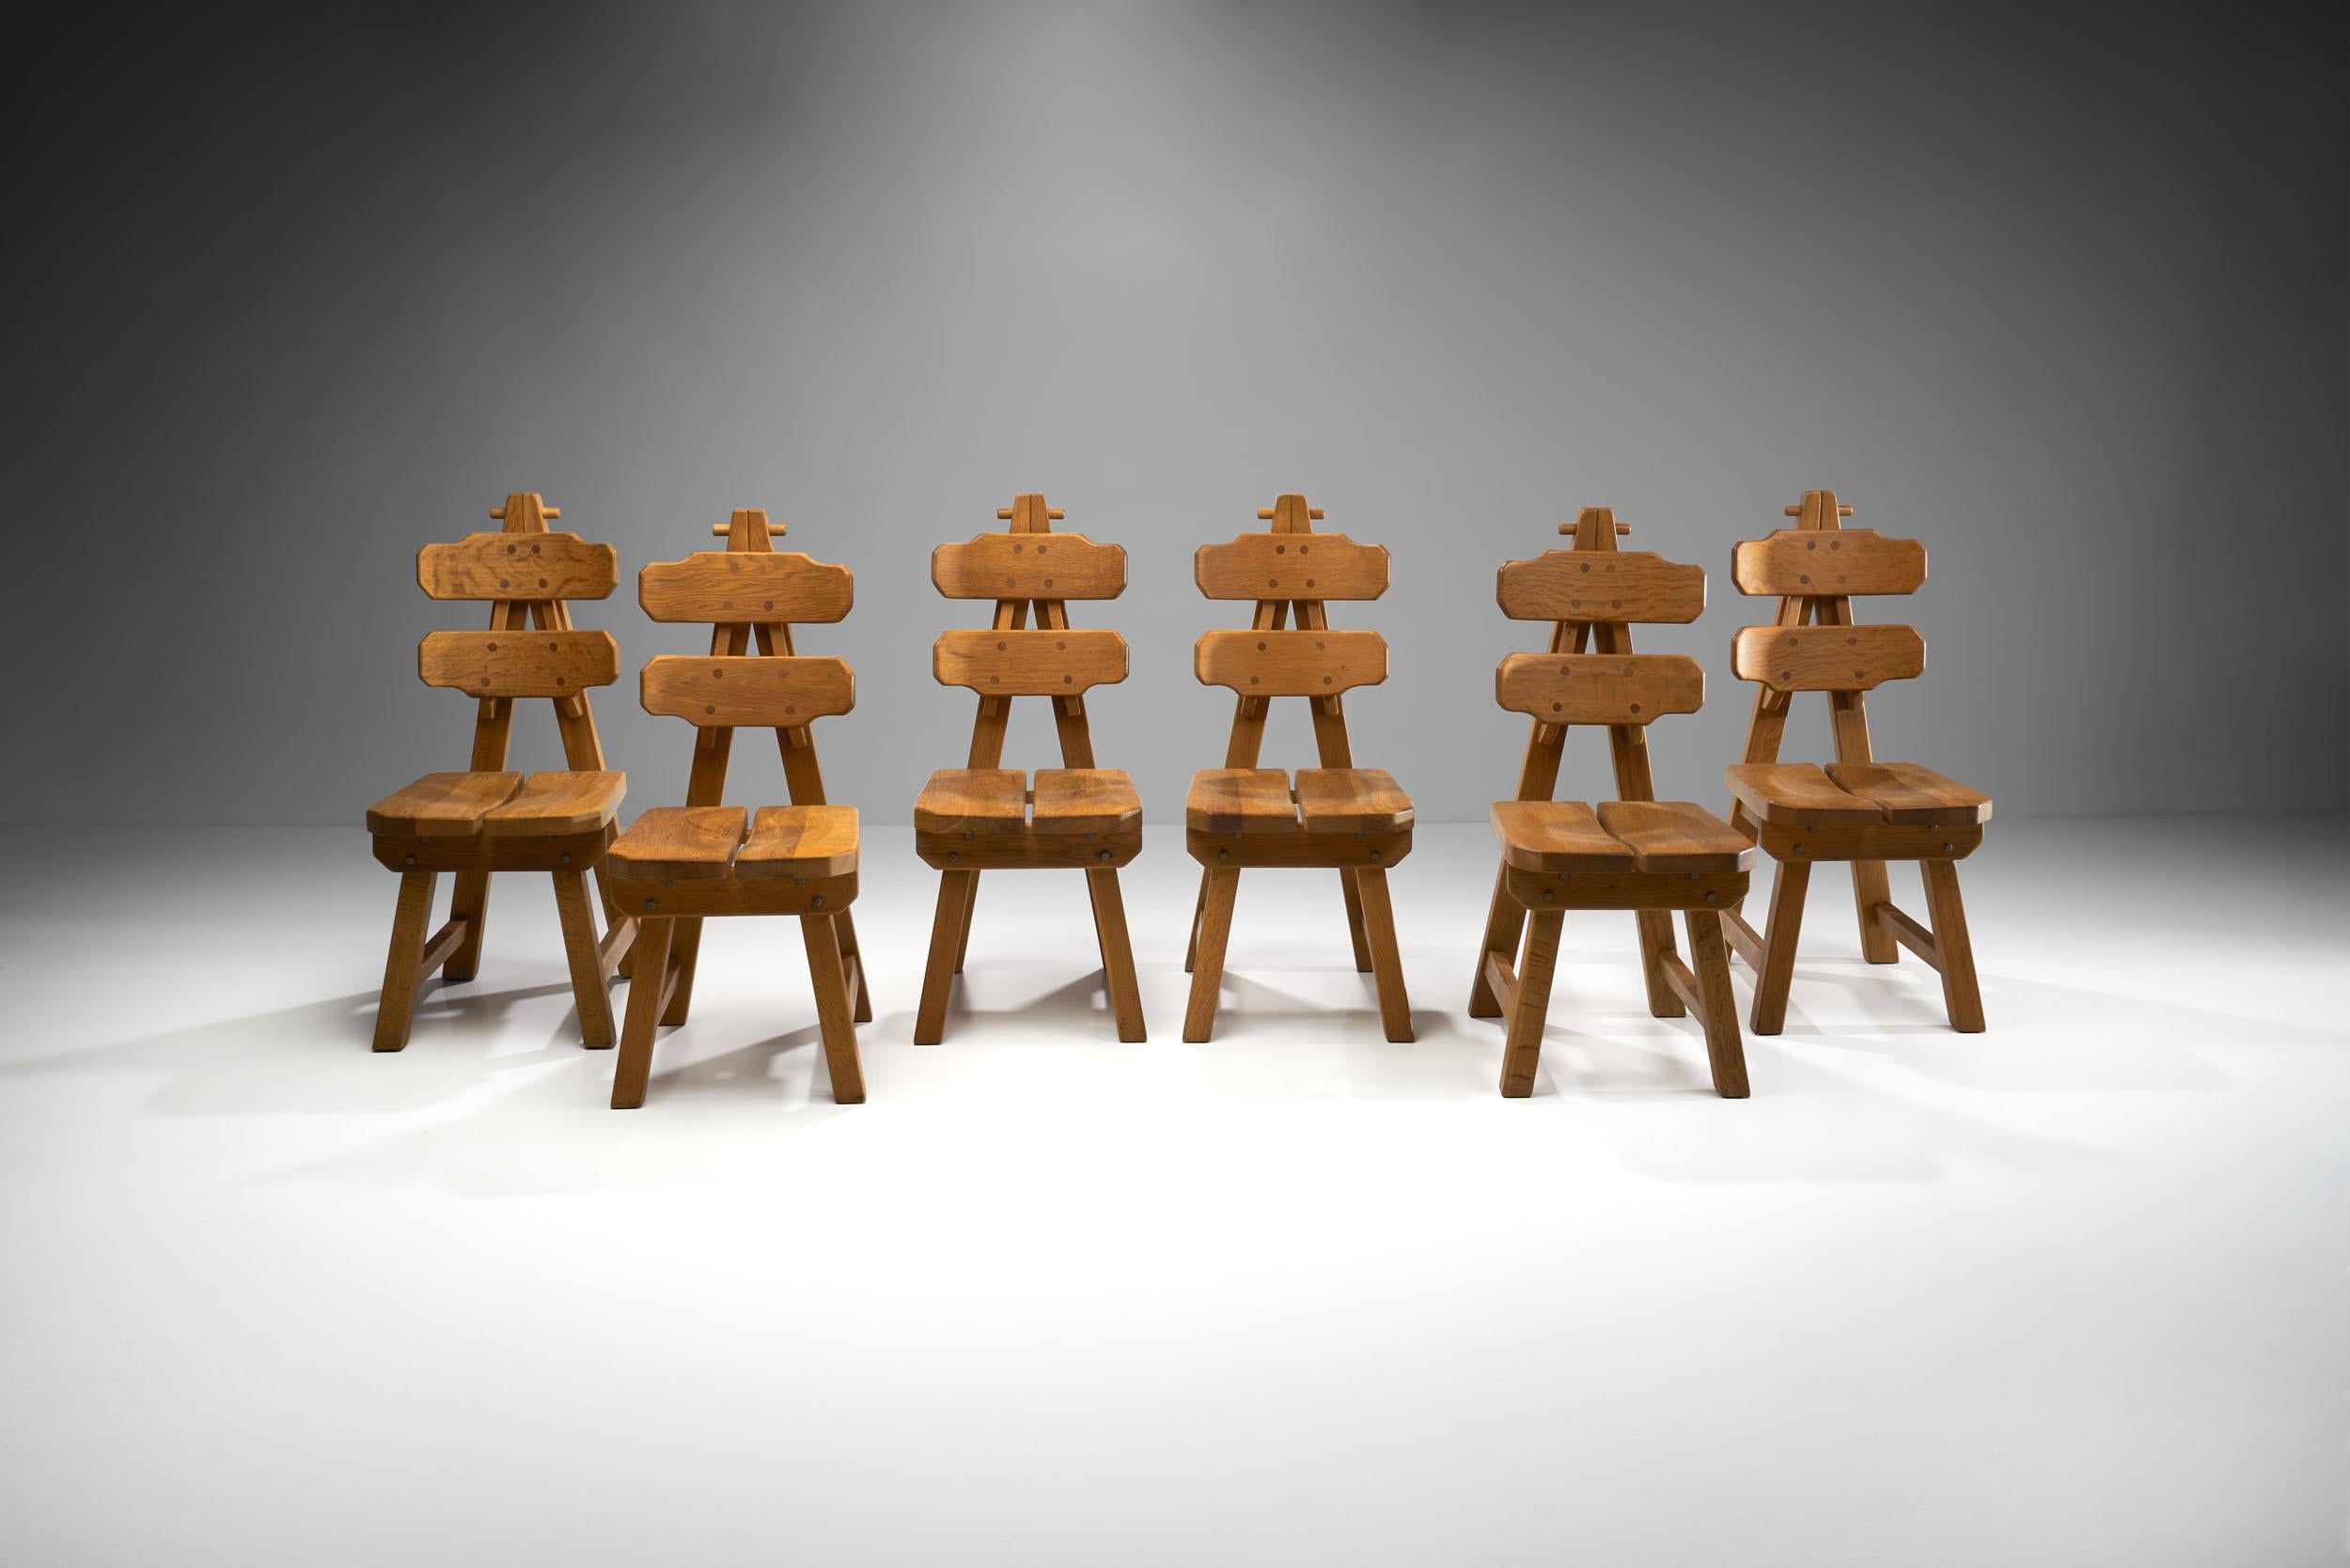 Spanish Set of 6 Brutalist Chairs in Solid Oak, Spain 1970s For Sale